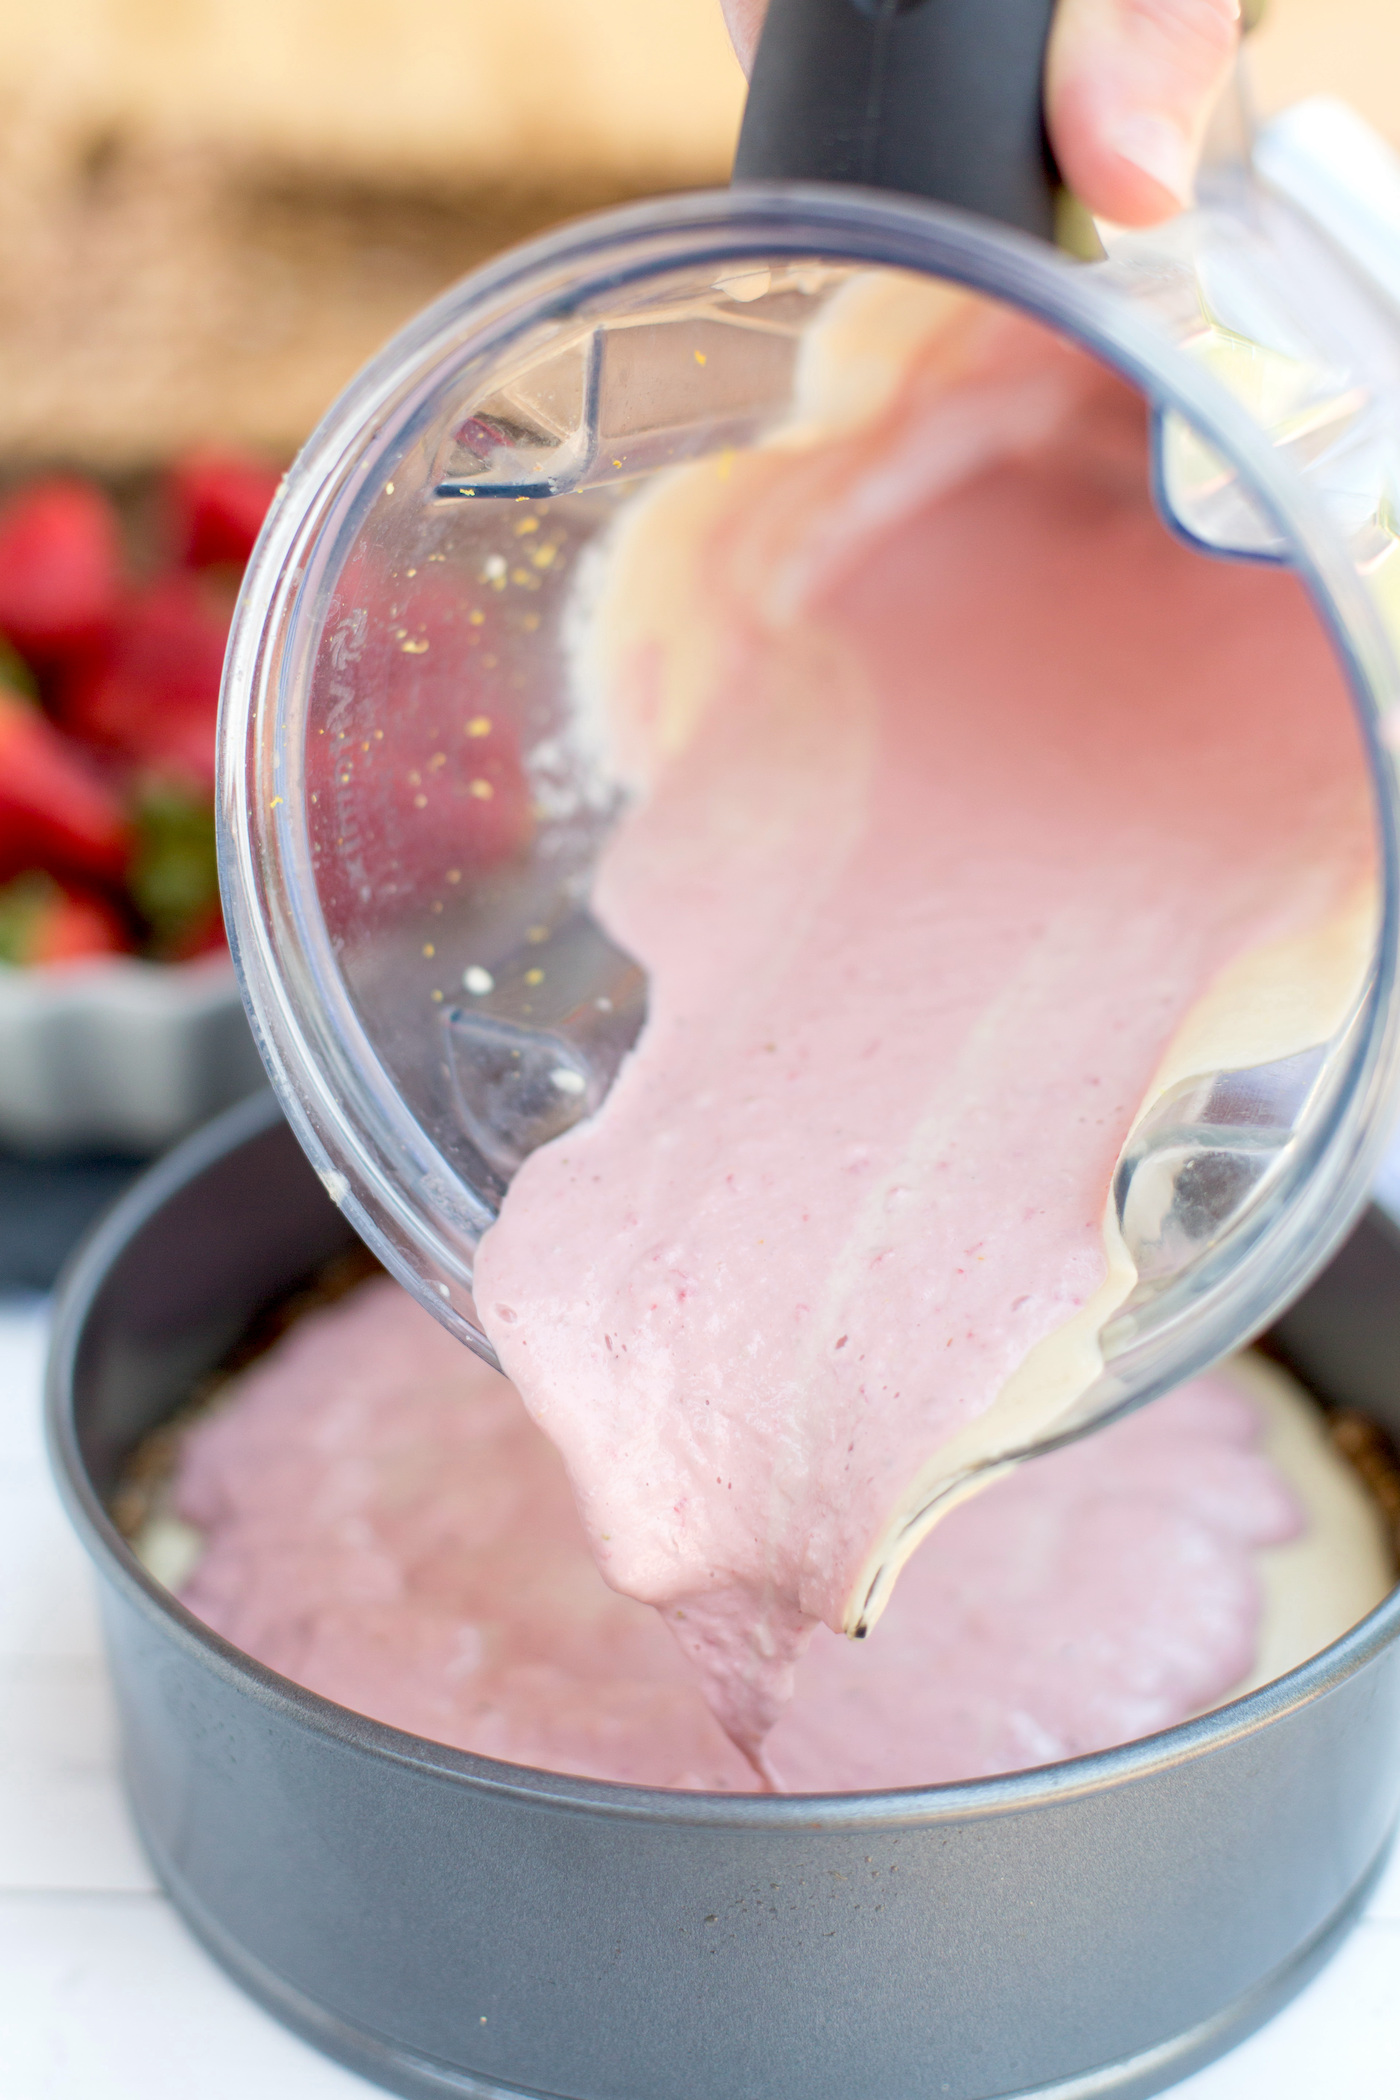 Pour the strawberry cheesecake filling into the springform pan